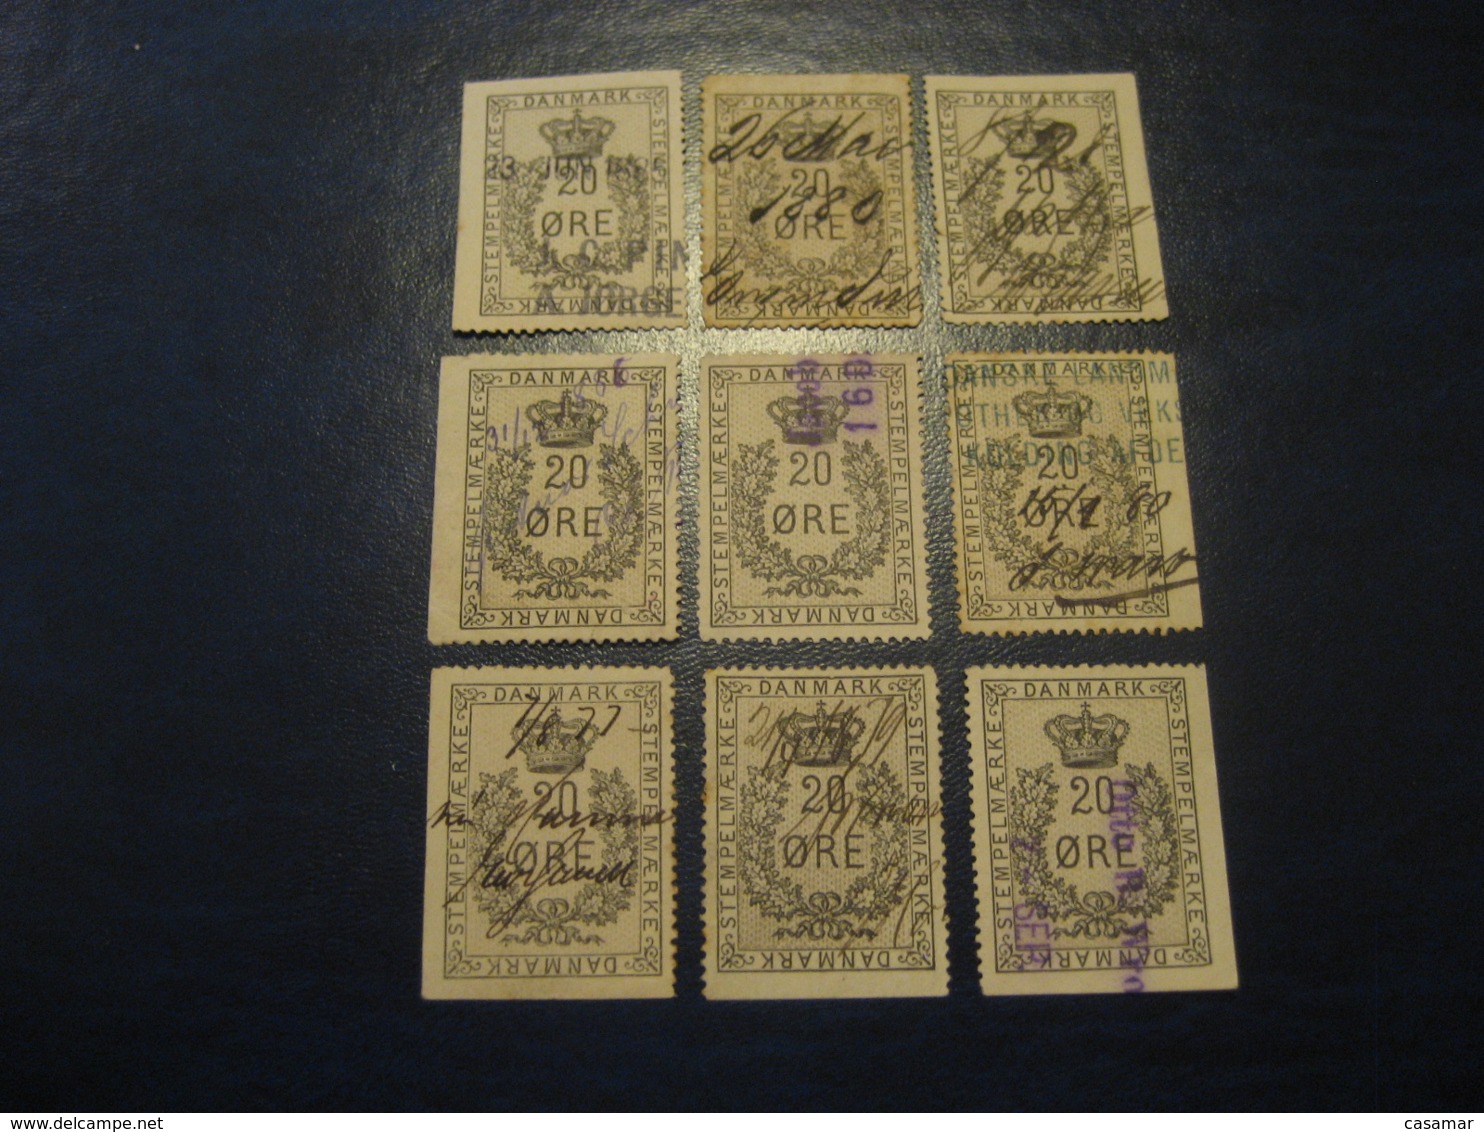 STEMPELMAERKE 20 Ore 9 Different Perforated / Imperforated Sides Fiscal Tax Revenue Postage Due Official DENMARK - Revenue Stamps